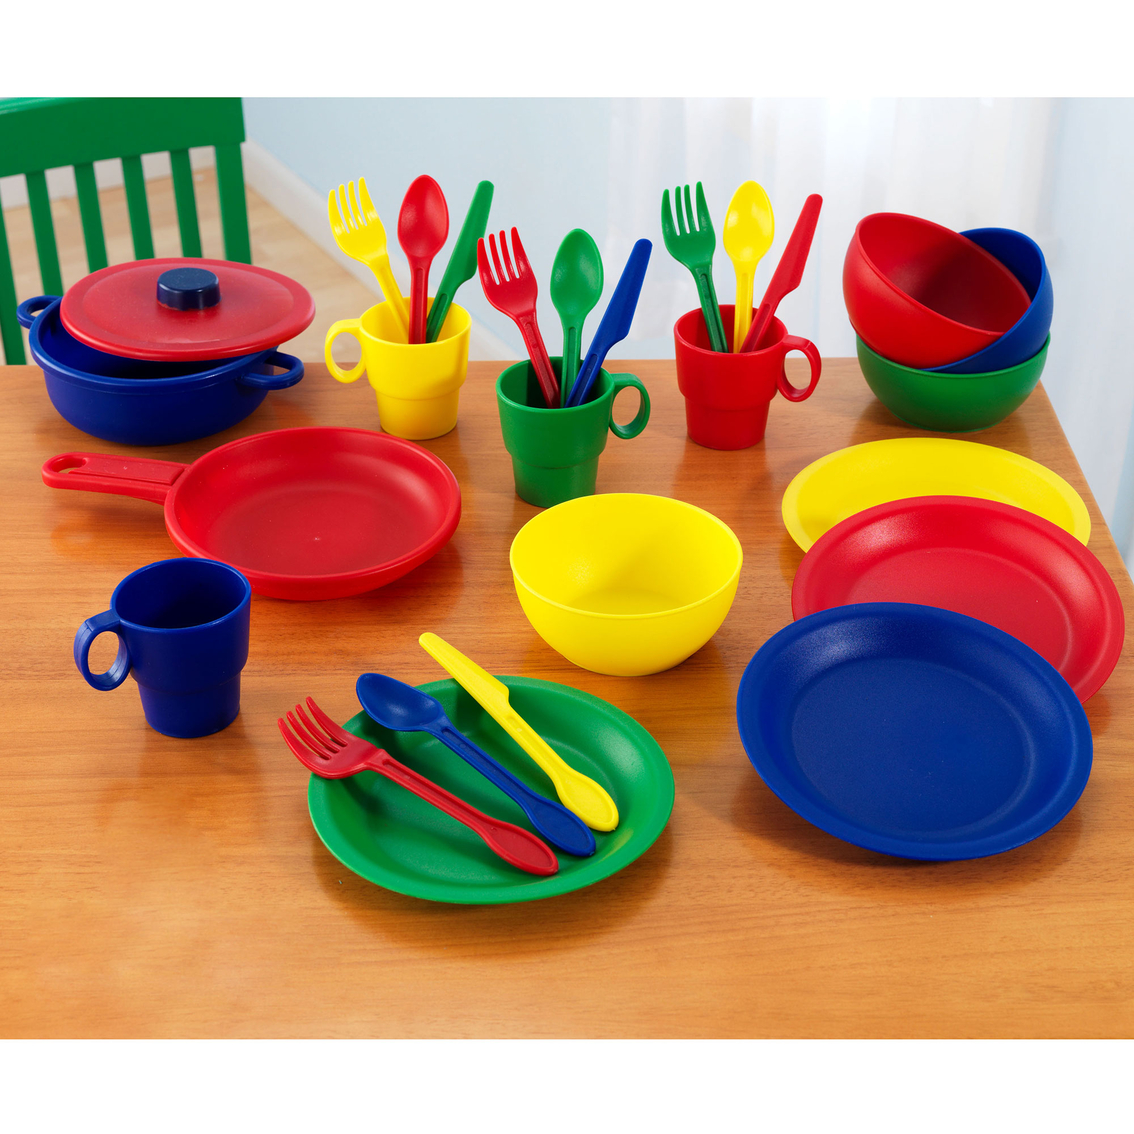 KidKraft Primary 27 pc. Dish and Cookware Set - Image 2 of 2